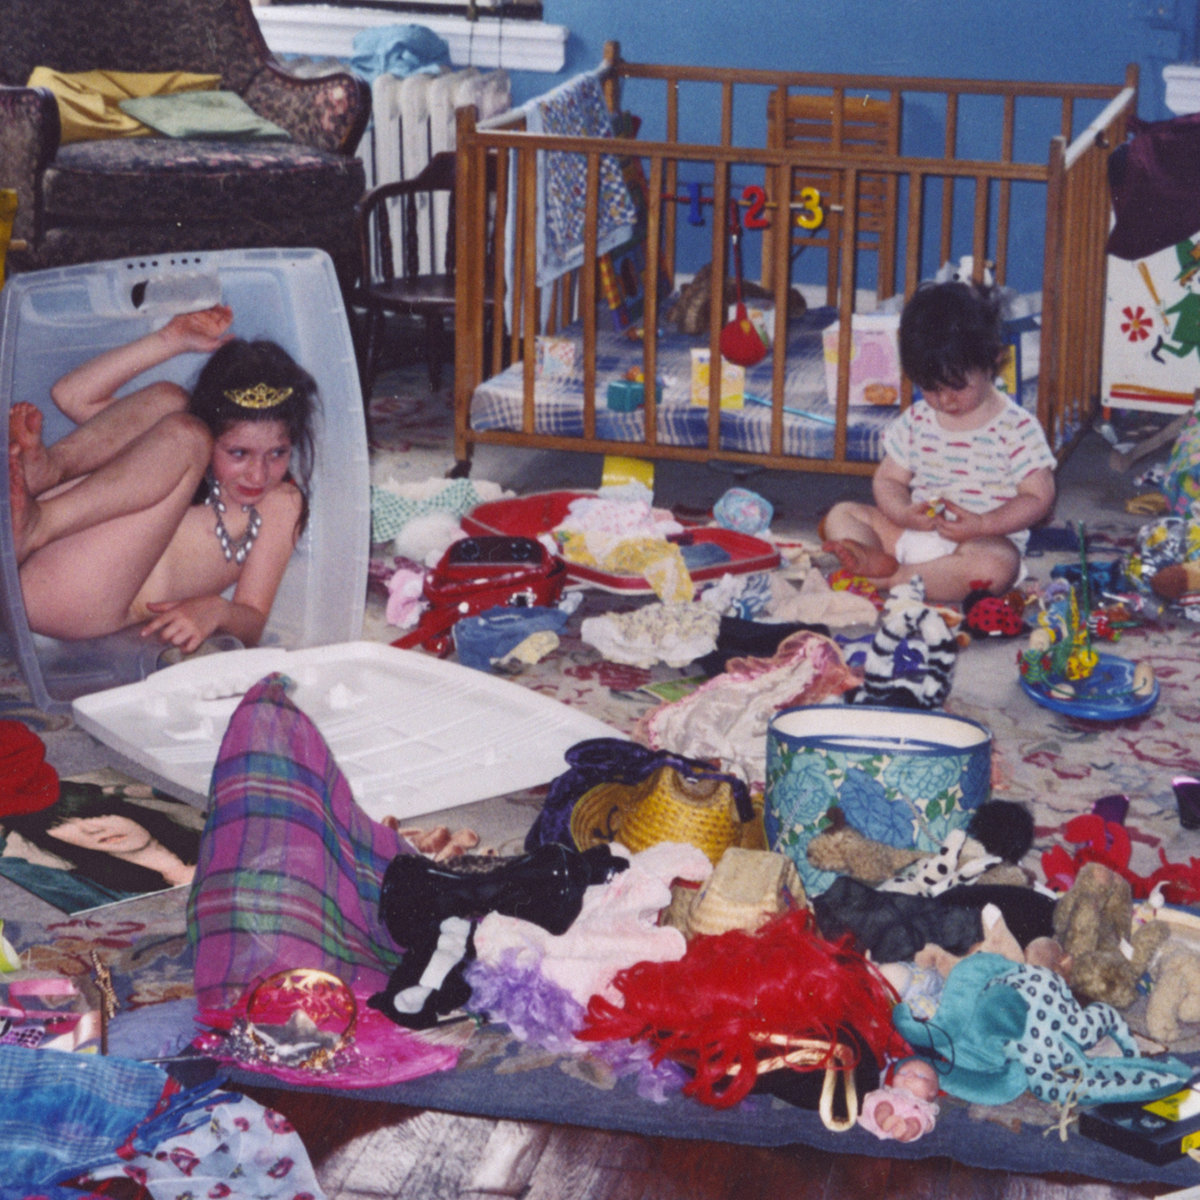 'Remind Me Tomorrow' by Sharon Van Etten, album review by Leslie Chu. The singer/somgwriter's full-length release comes out on January 18th via Jagjaguwar